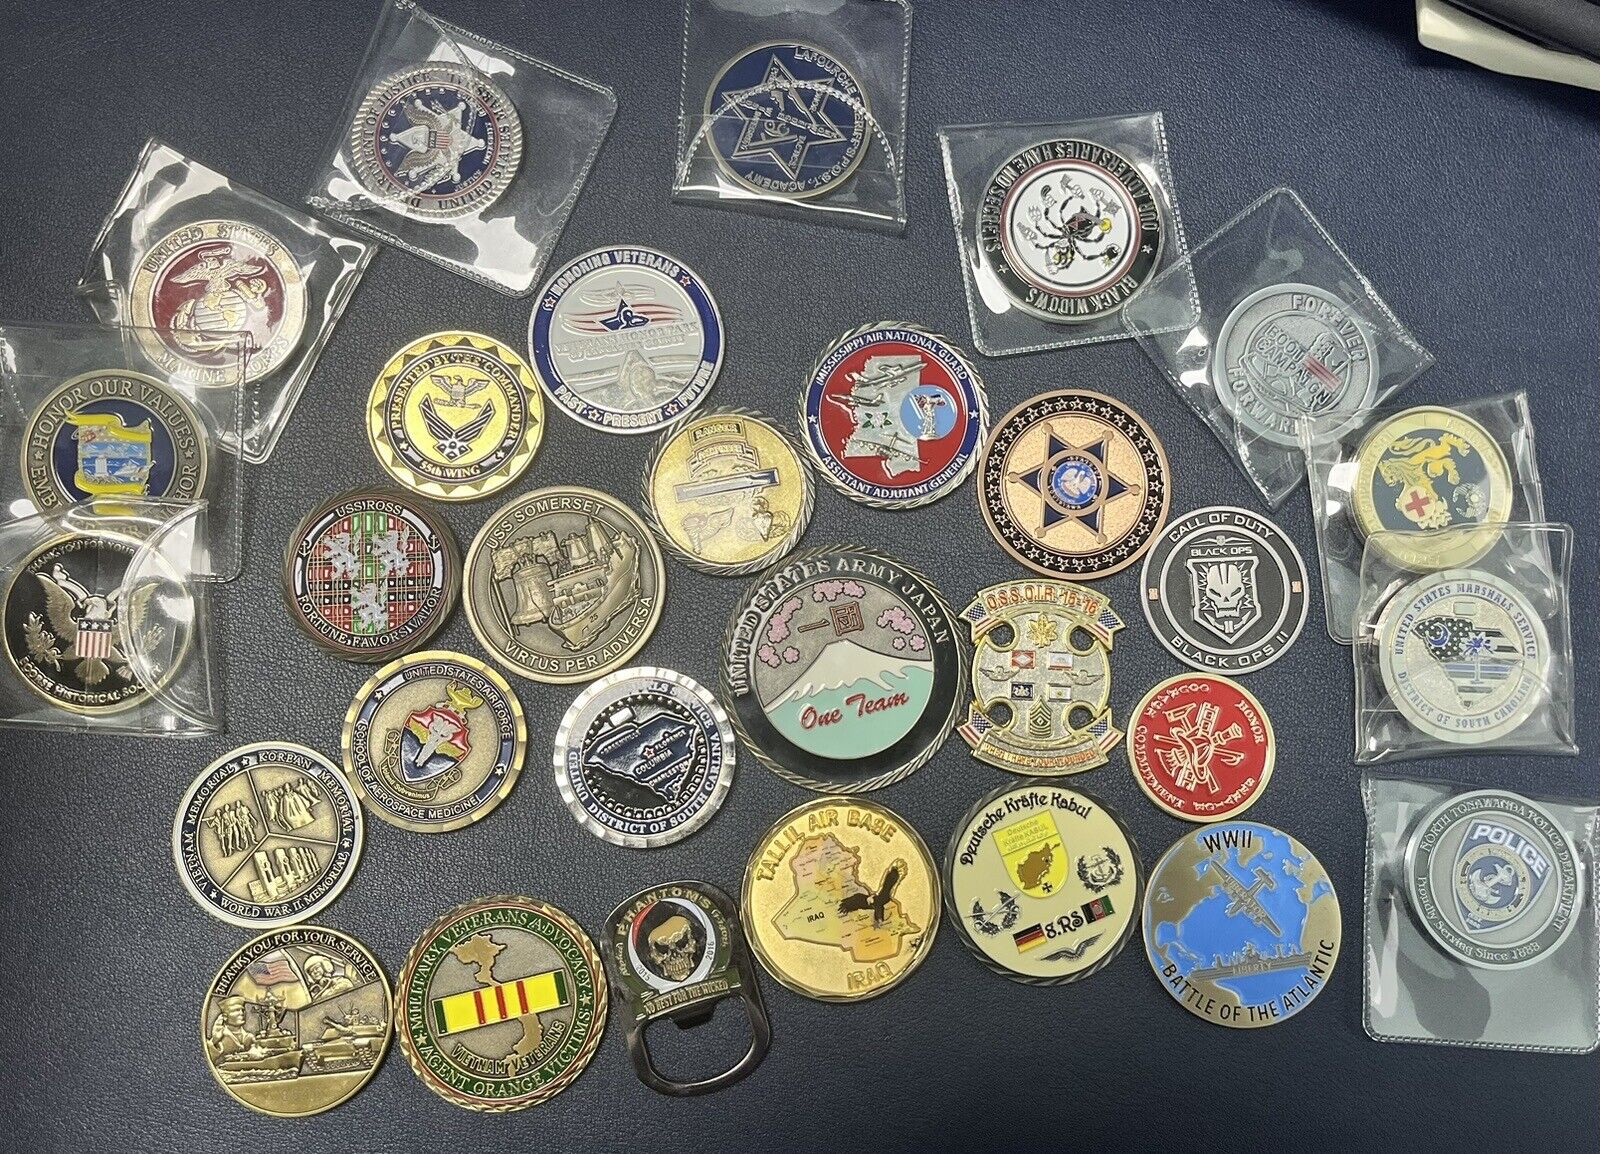 CHALLENGE COIN RANDOM SET OF 10 DIFFERENT MILITARY, POLICE, FIRE